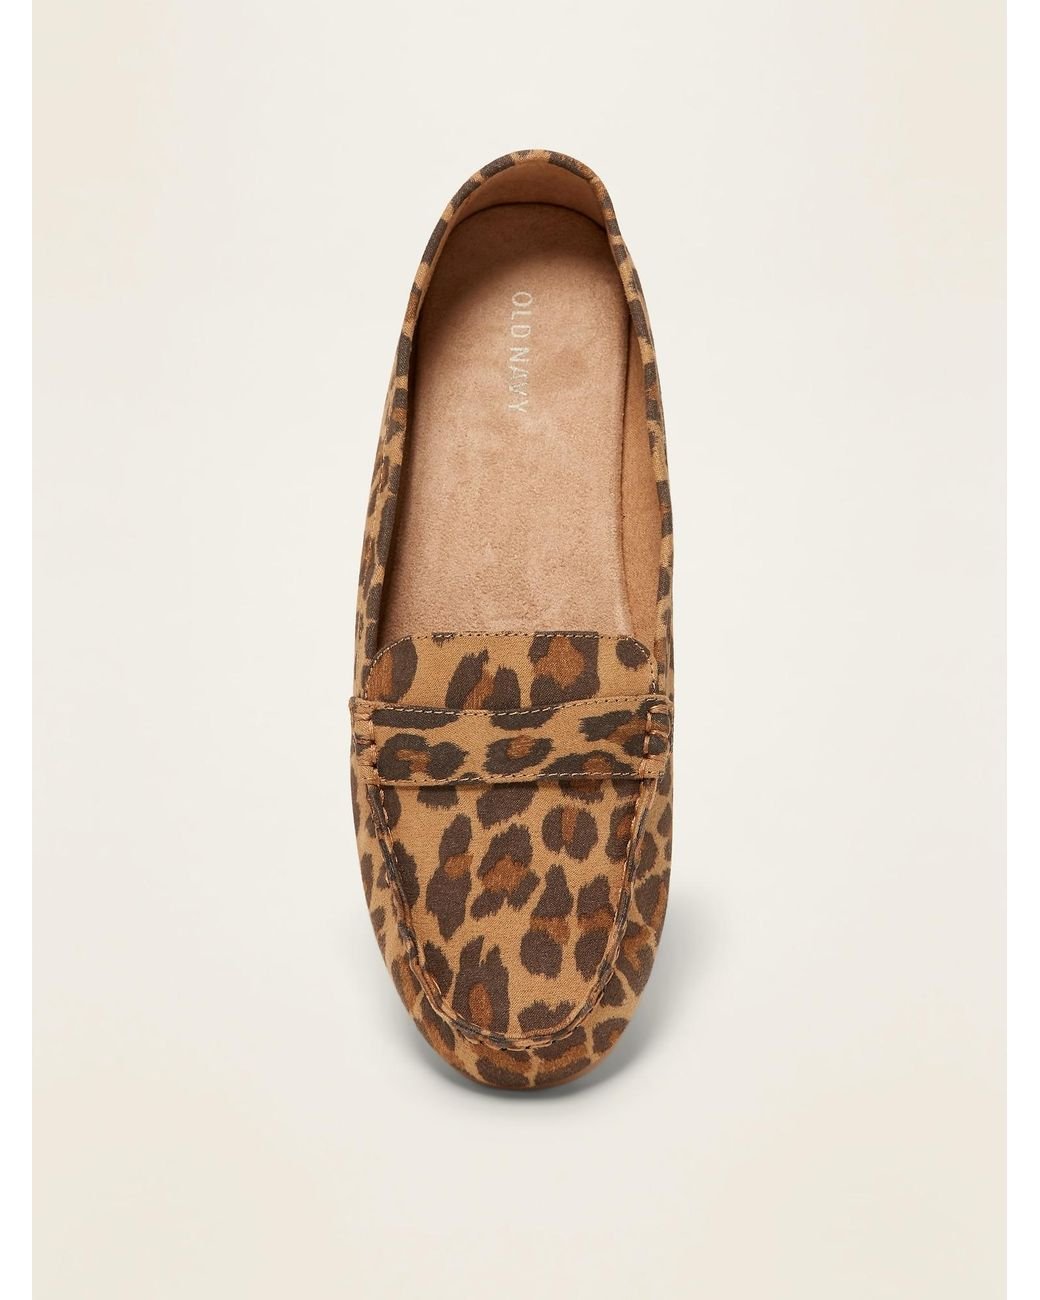 old navy leopard loafers